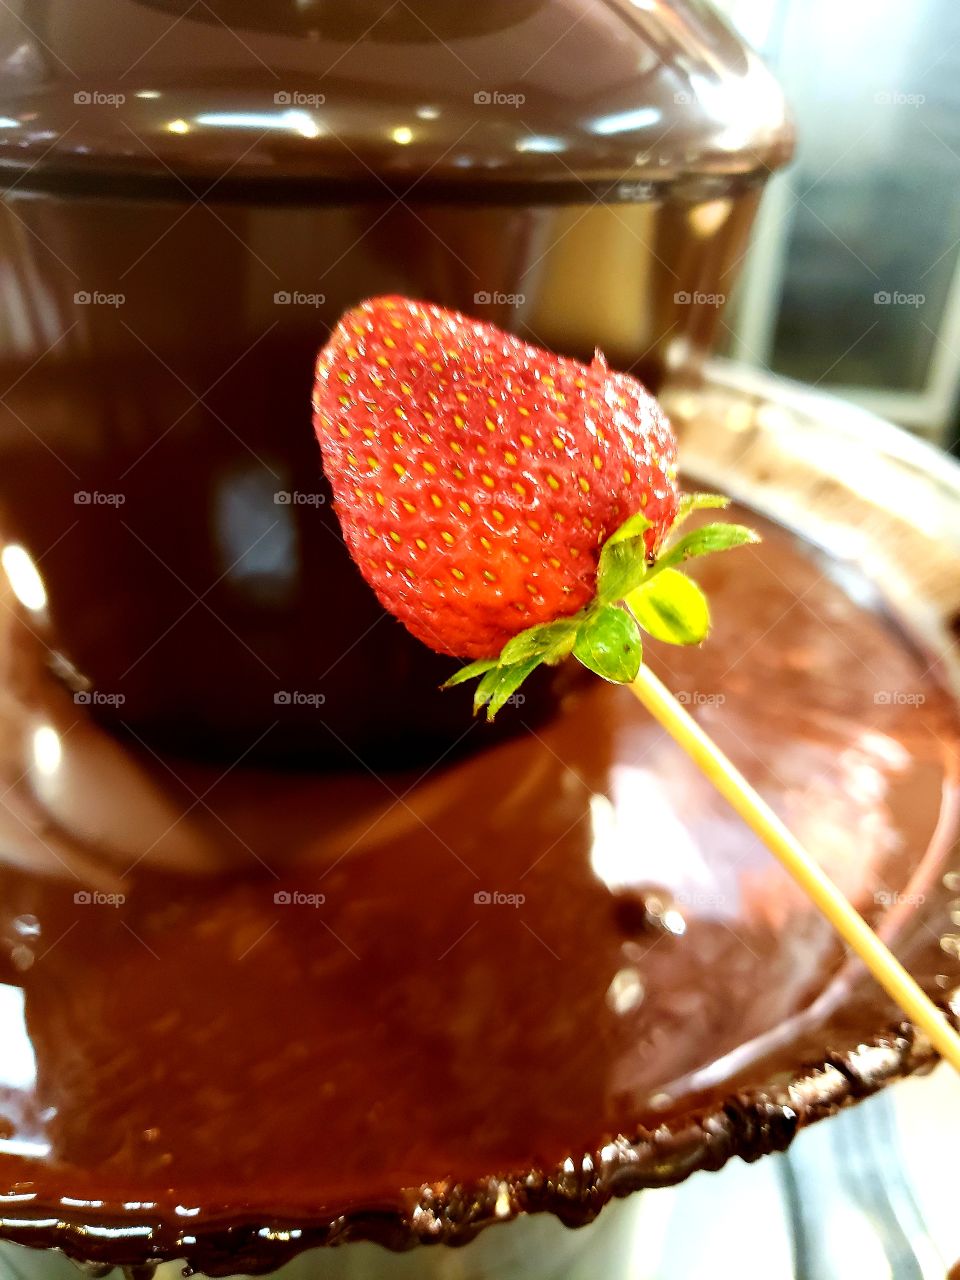 Ripe strawberry about to be dipped in chocolate fondue. The perfect combination.